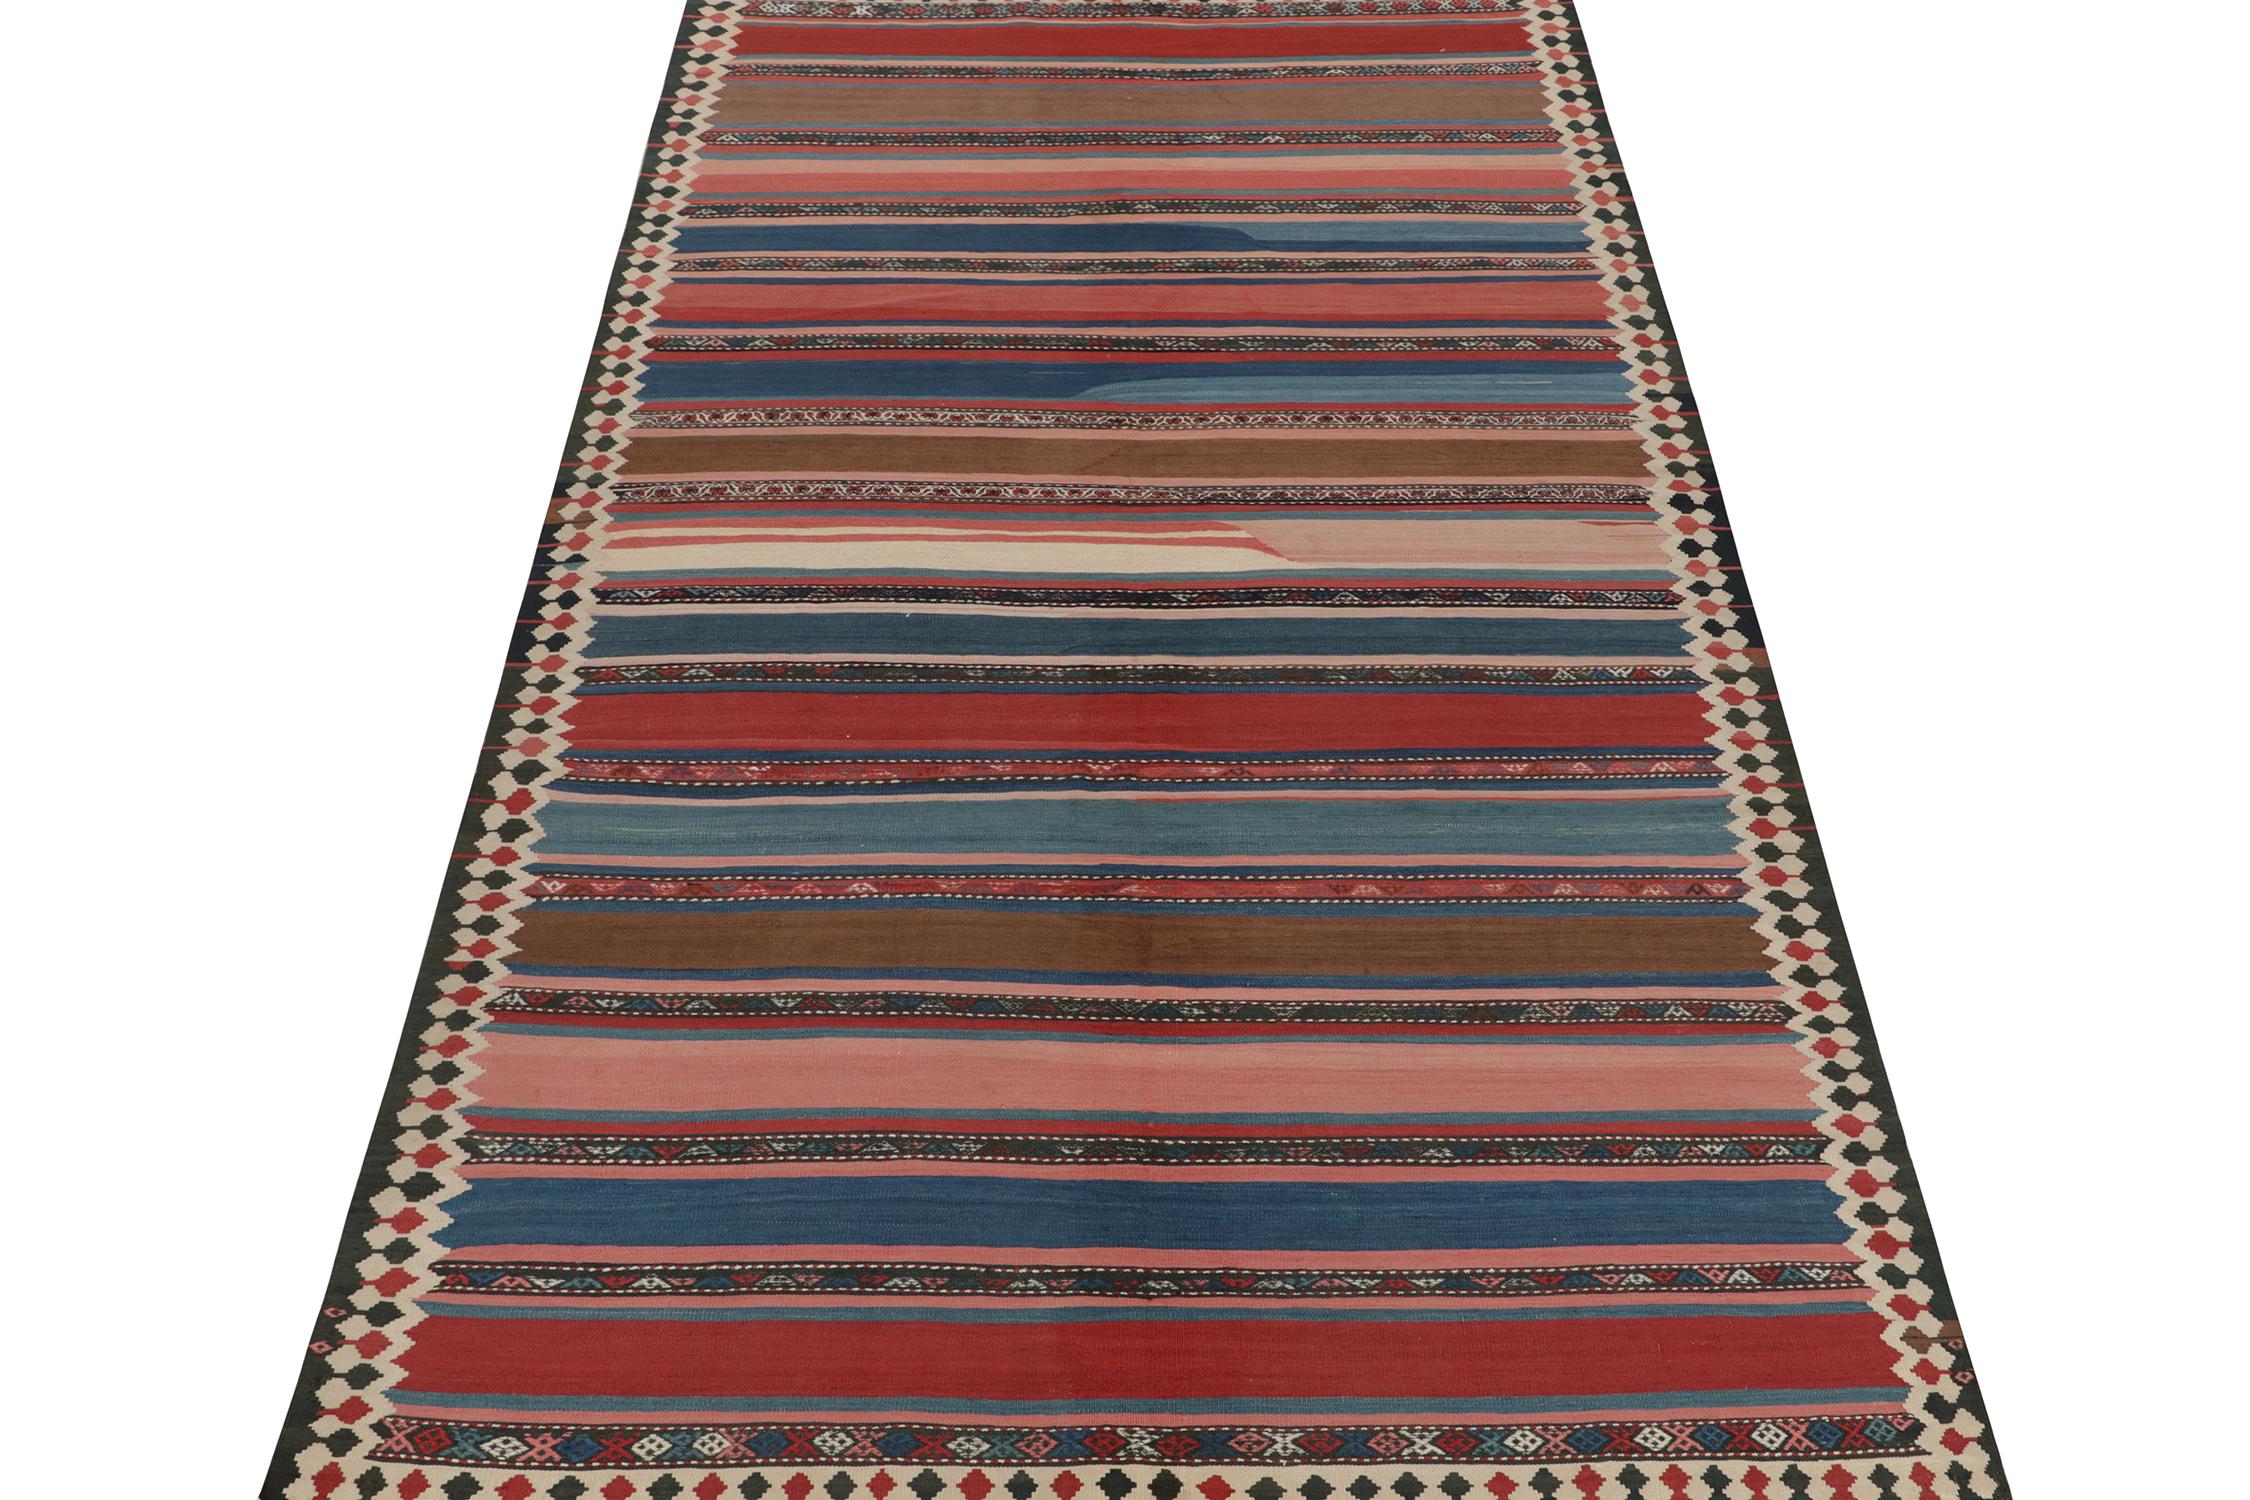 This vintage 6x12 Persian kilim is a Shahsavan tribal rug or outstanding provenance. Handwoven in wool, it’s believed to originate circa 1950-1960. 

Further on the Design:

The design prefers wide polychromatic stripes in the field, wrapped in rich